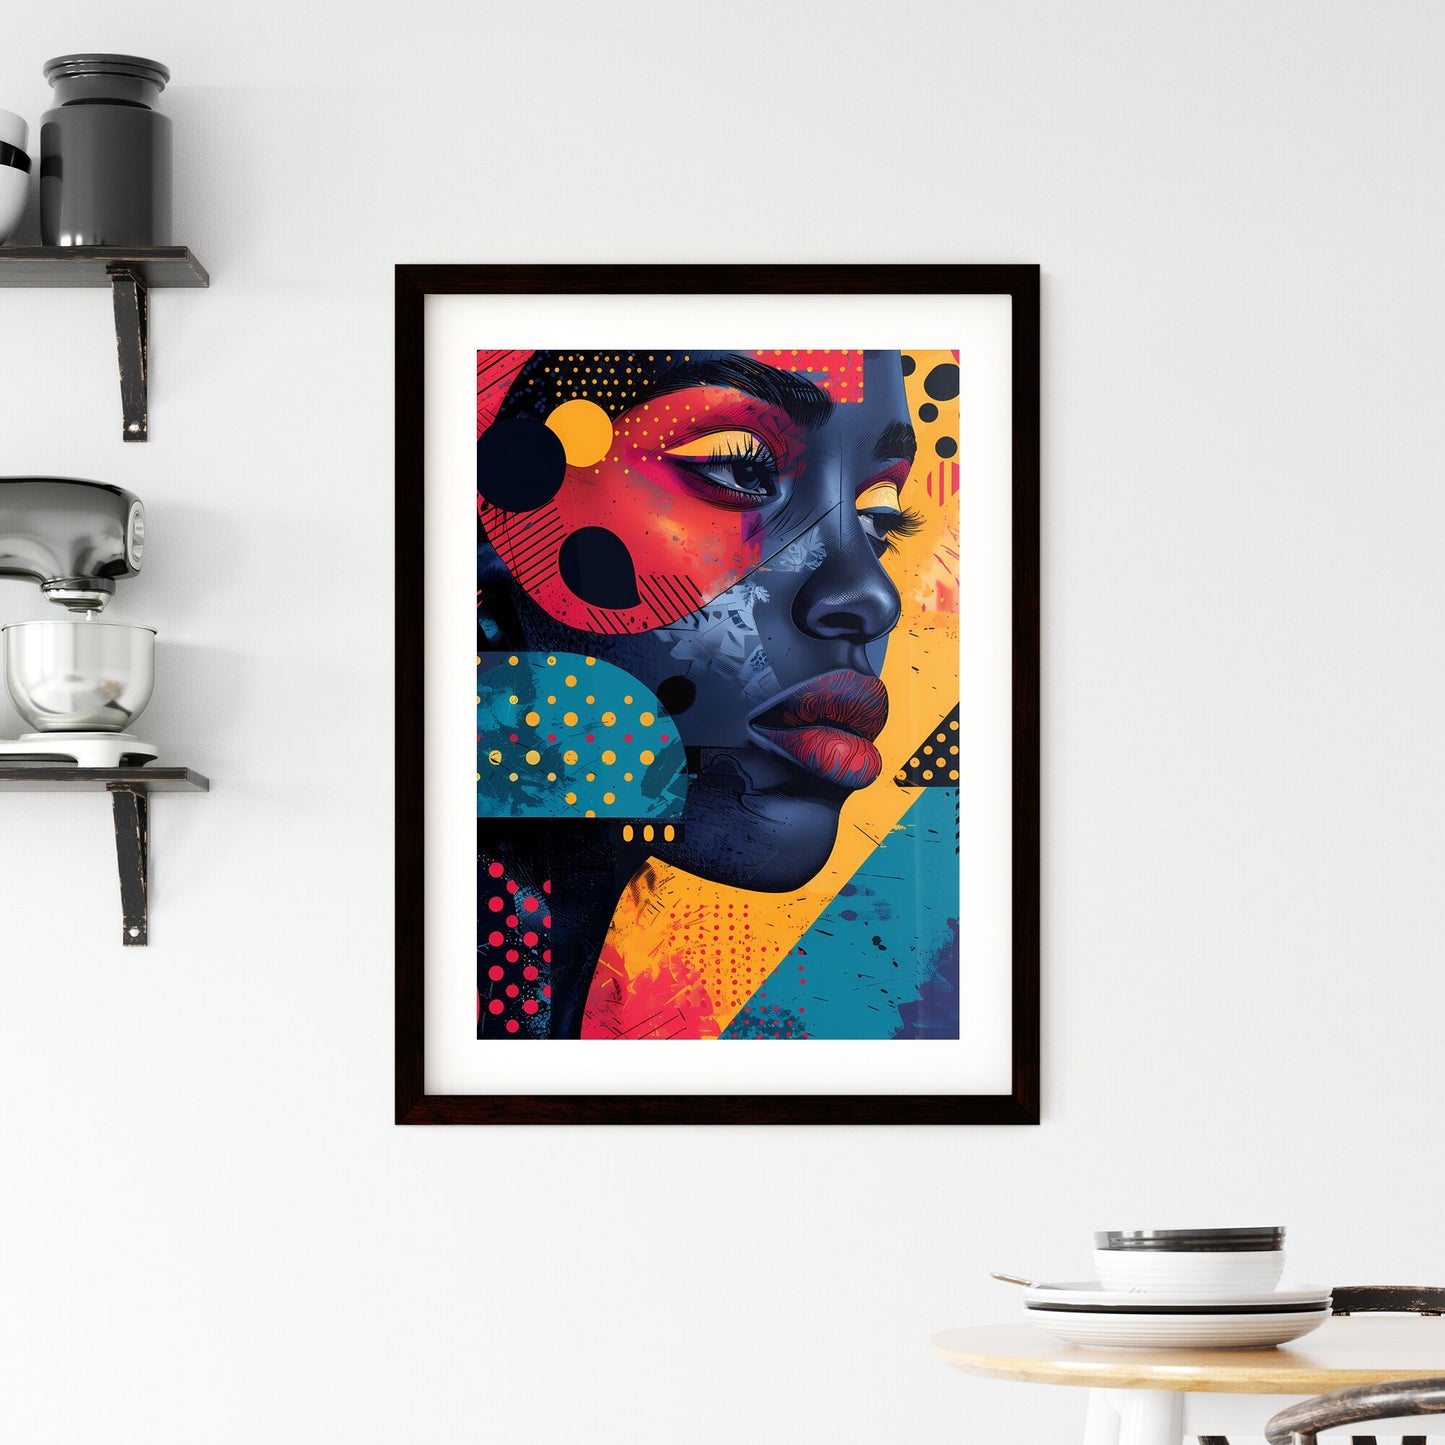 Vibrant African Urban Art: Abstract Human Forms, Patterns & Pastel Colors - Striking Modern Painting Default Title